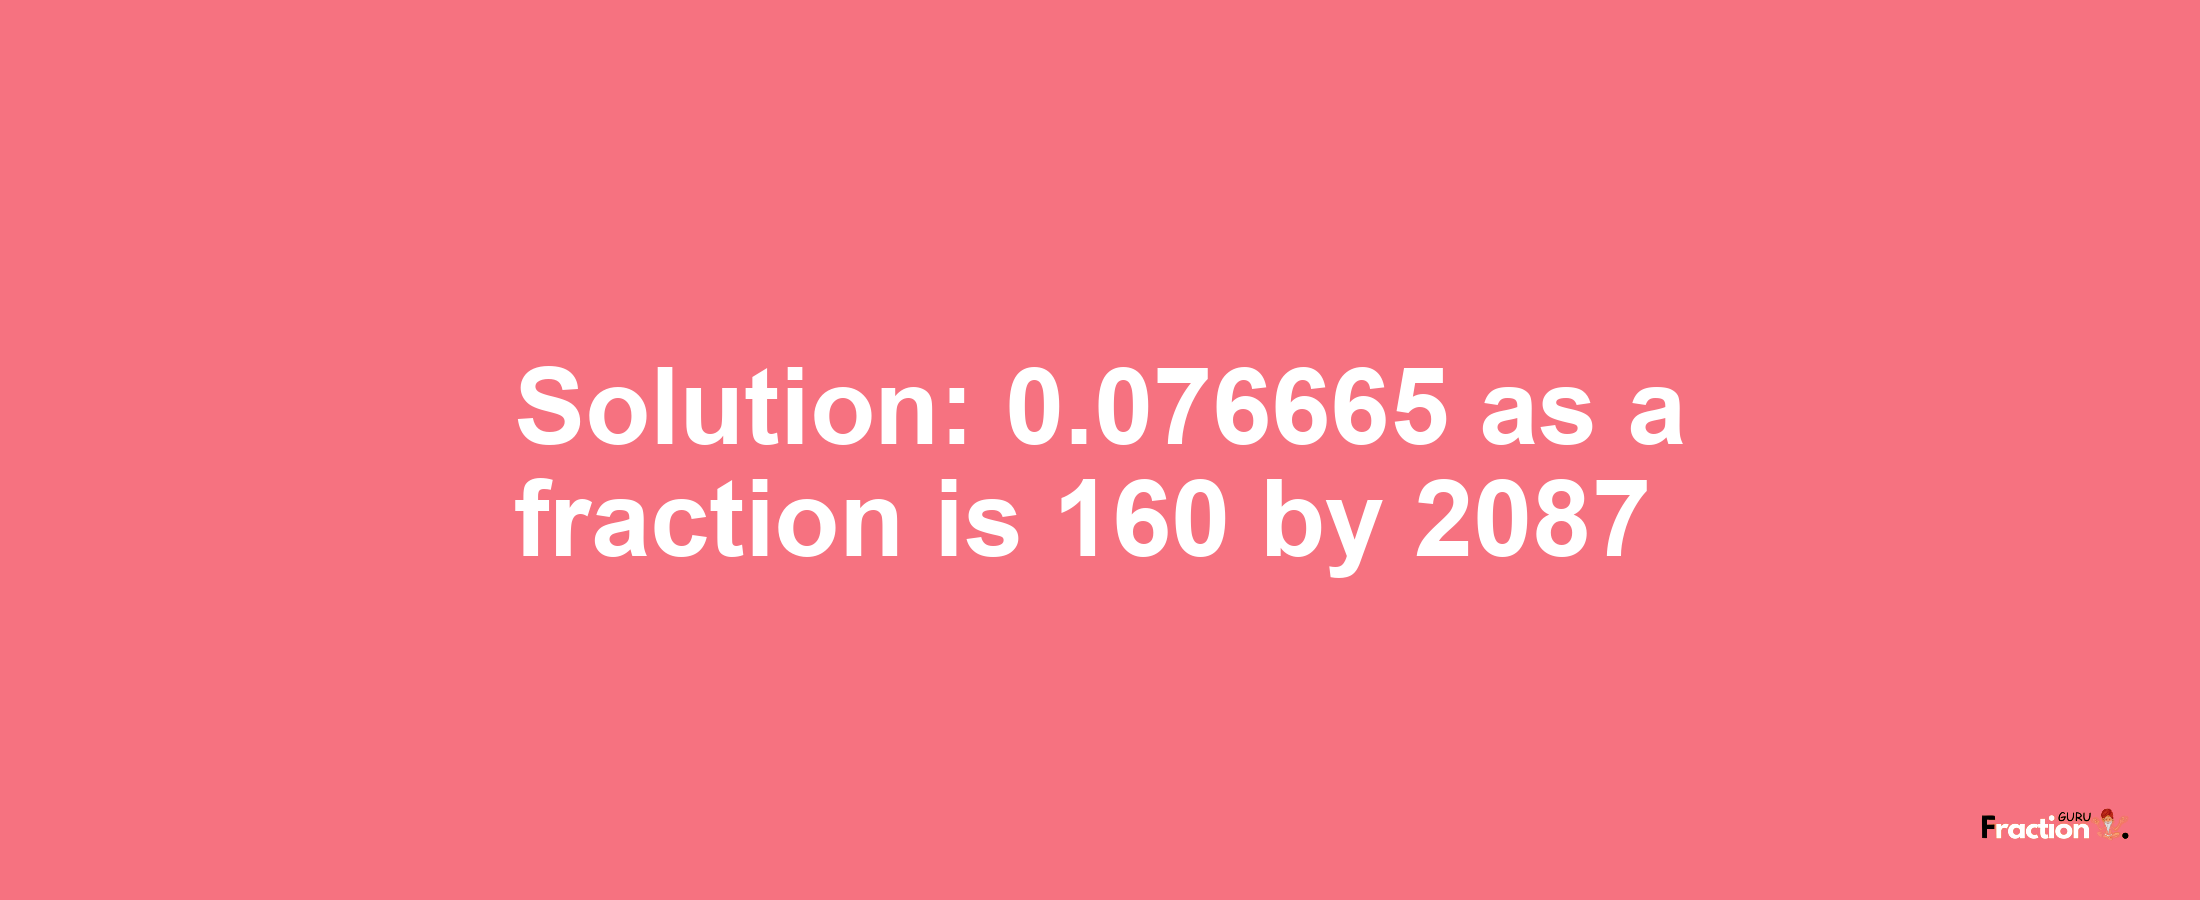 Solution:0.076665 as a fraction is 160/2087